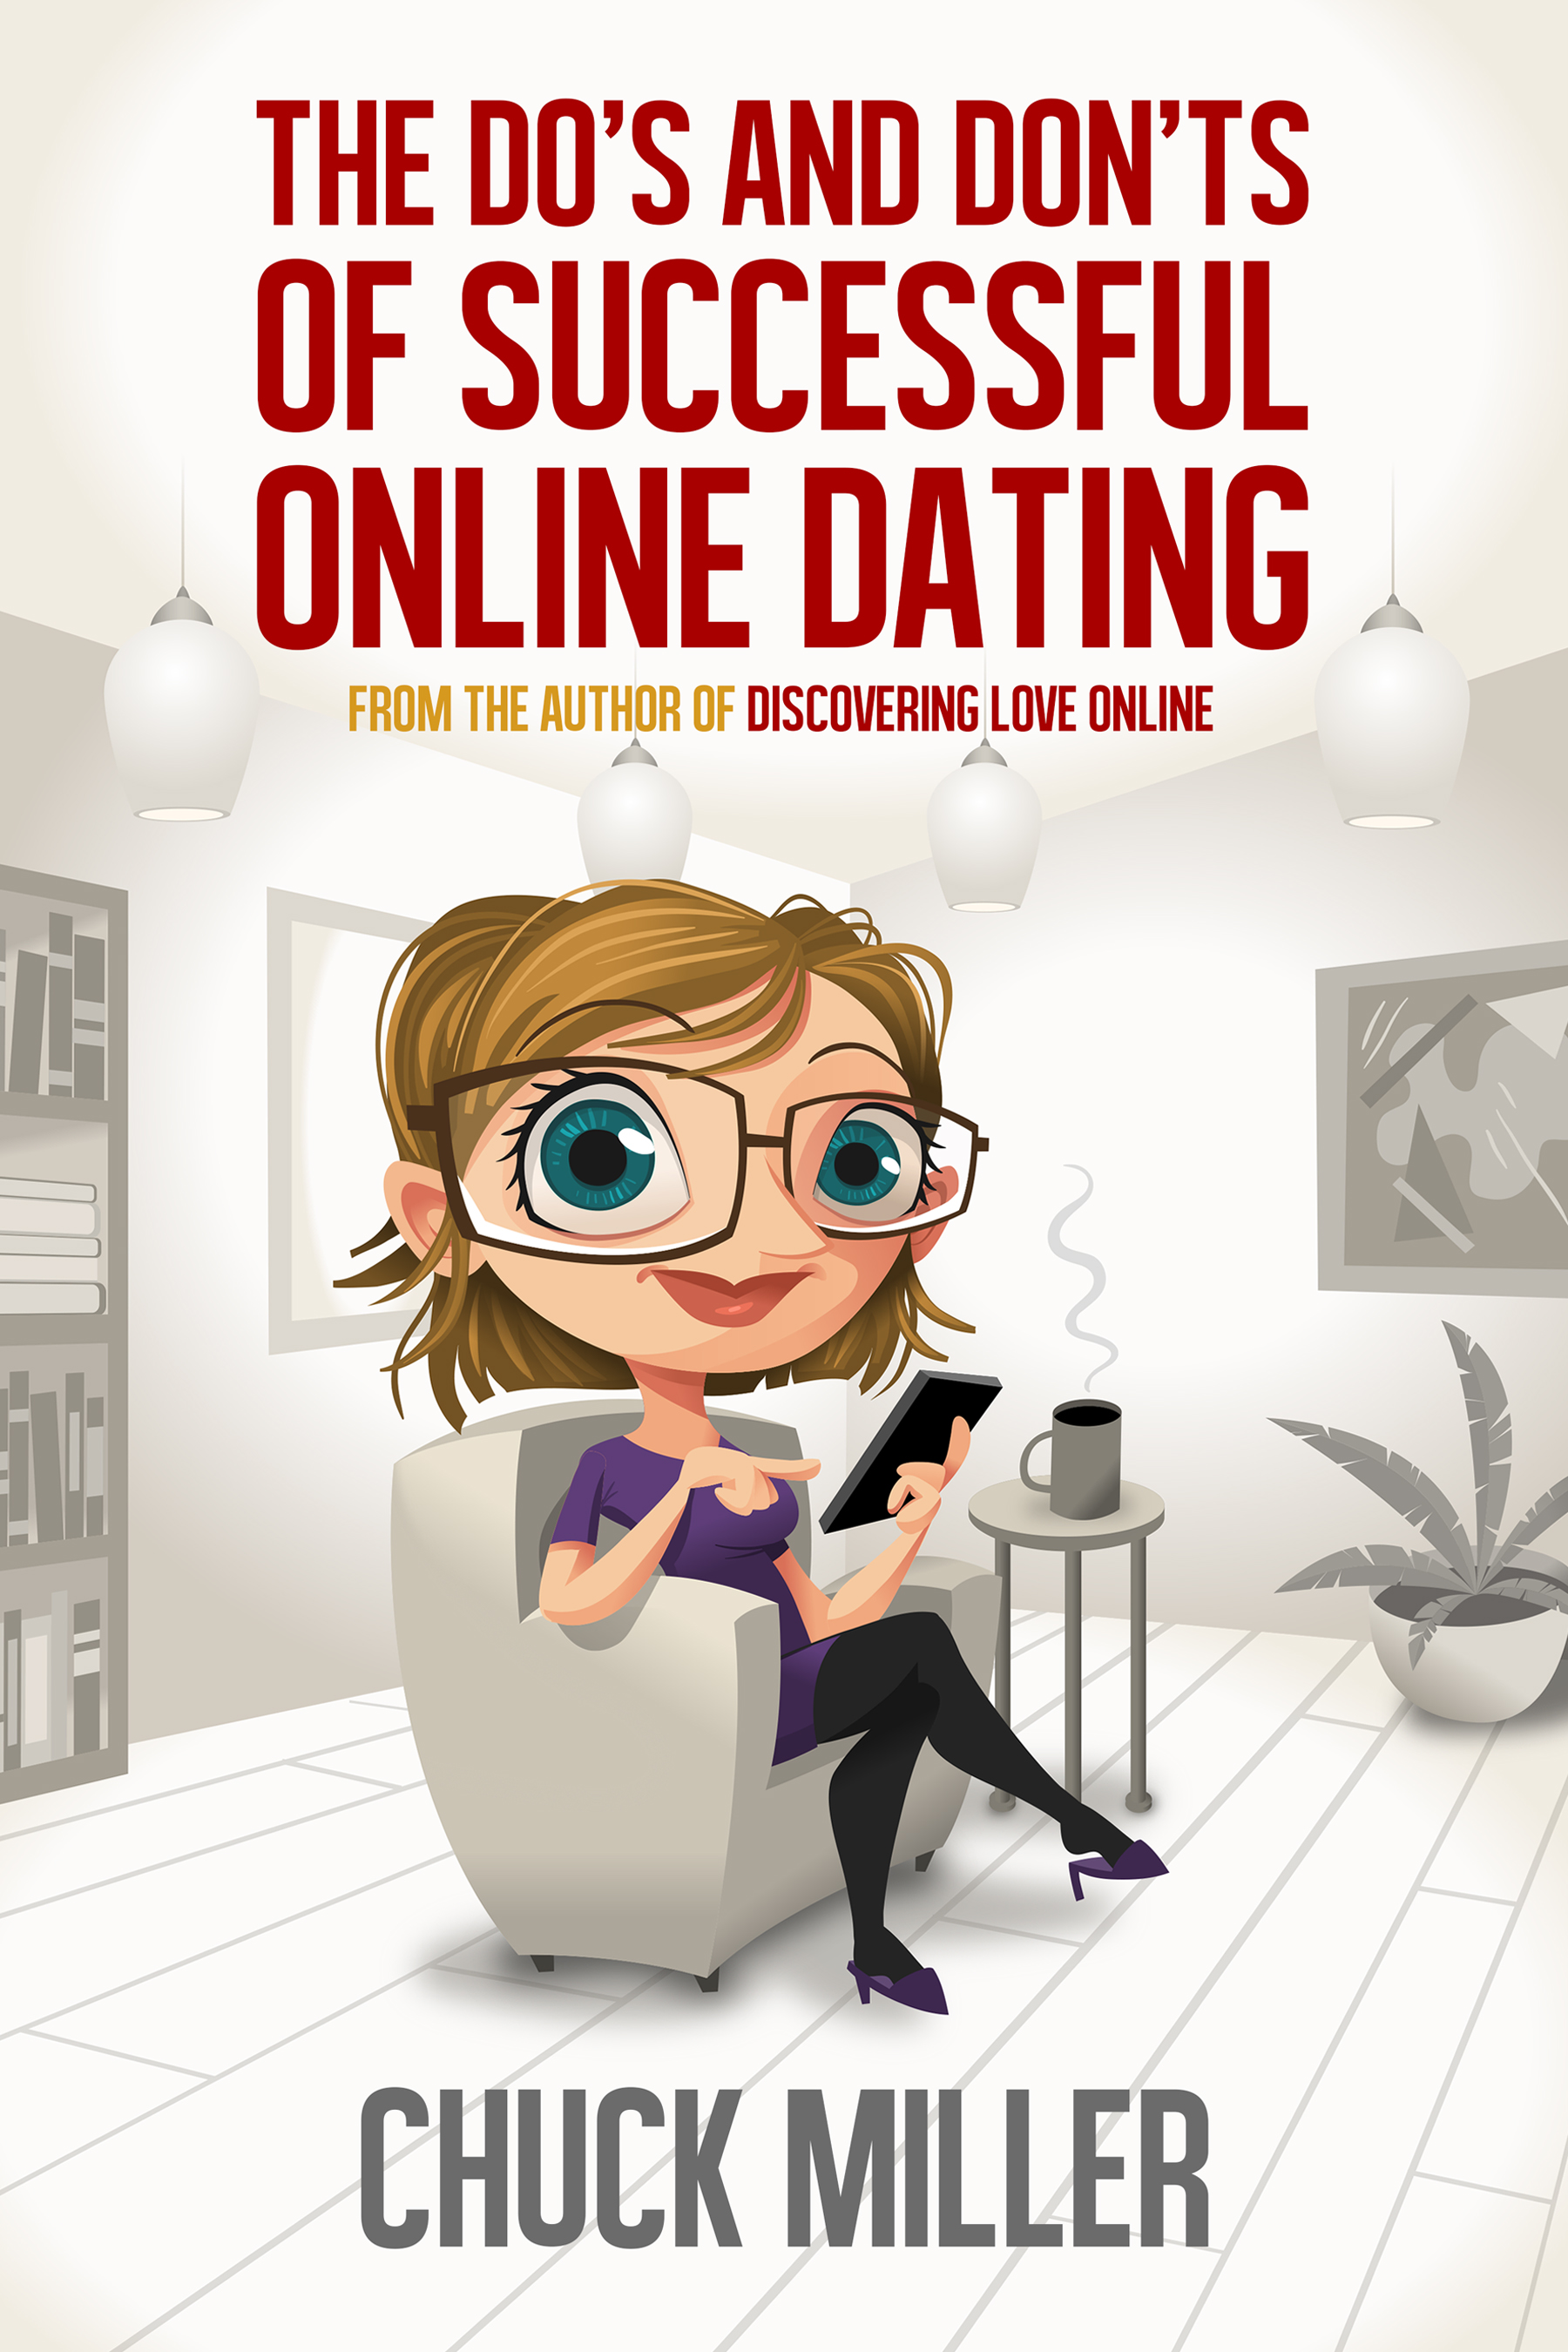 FREE: The Do’s and Don’ts of Successful Online Dating by Chuck Miller